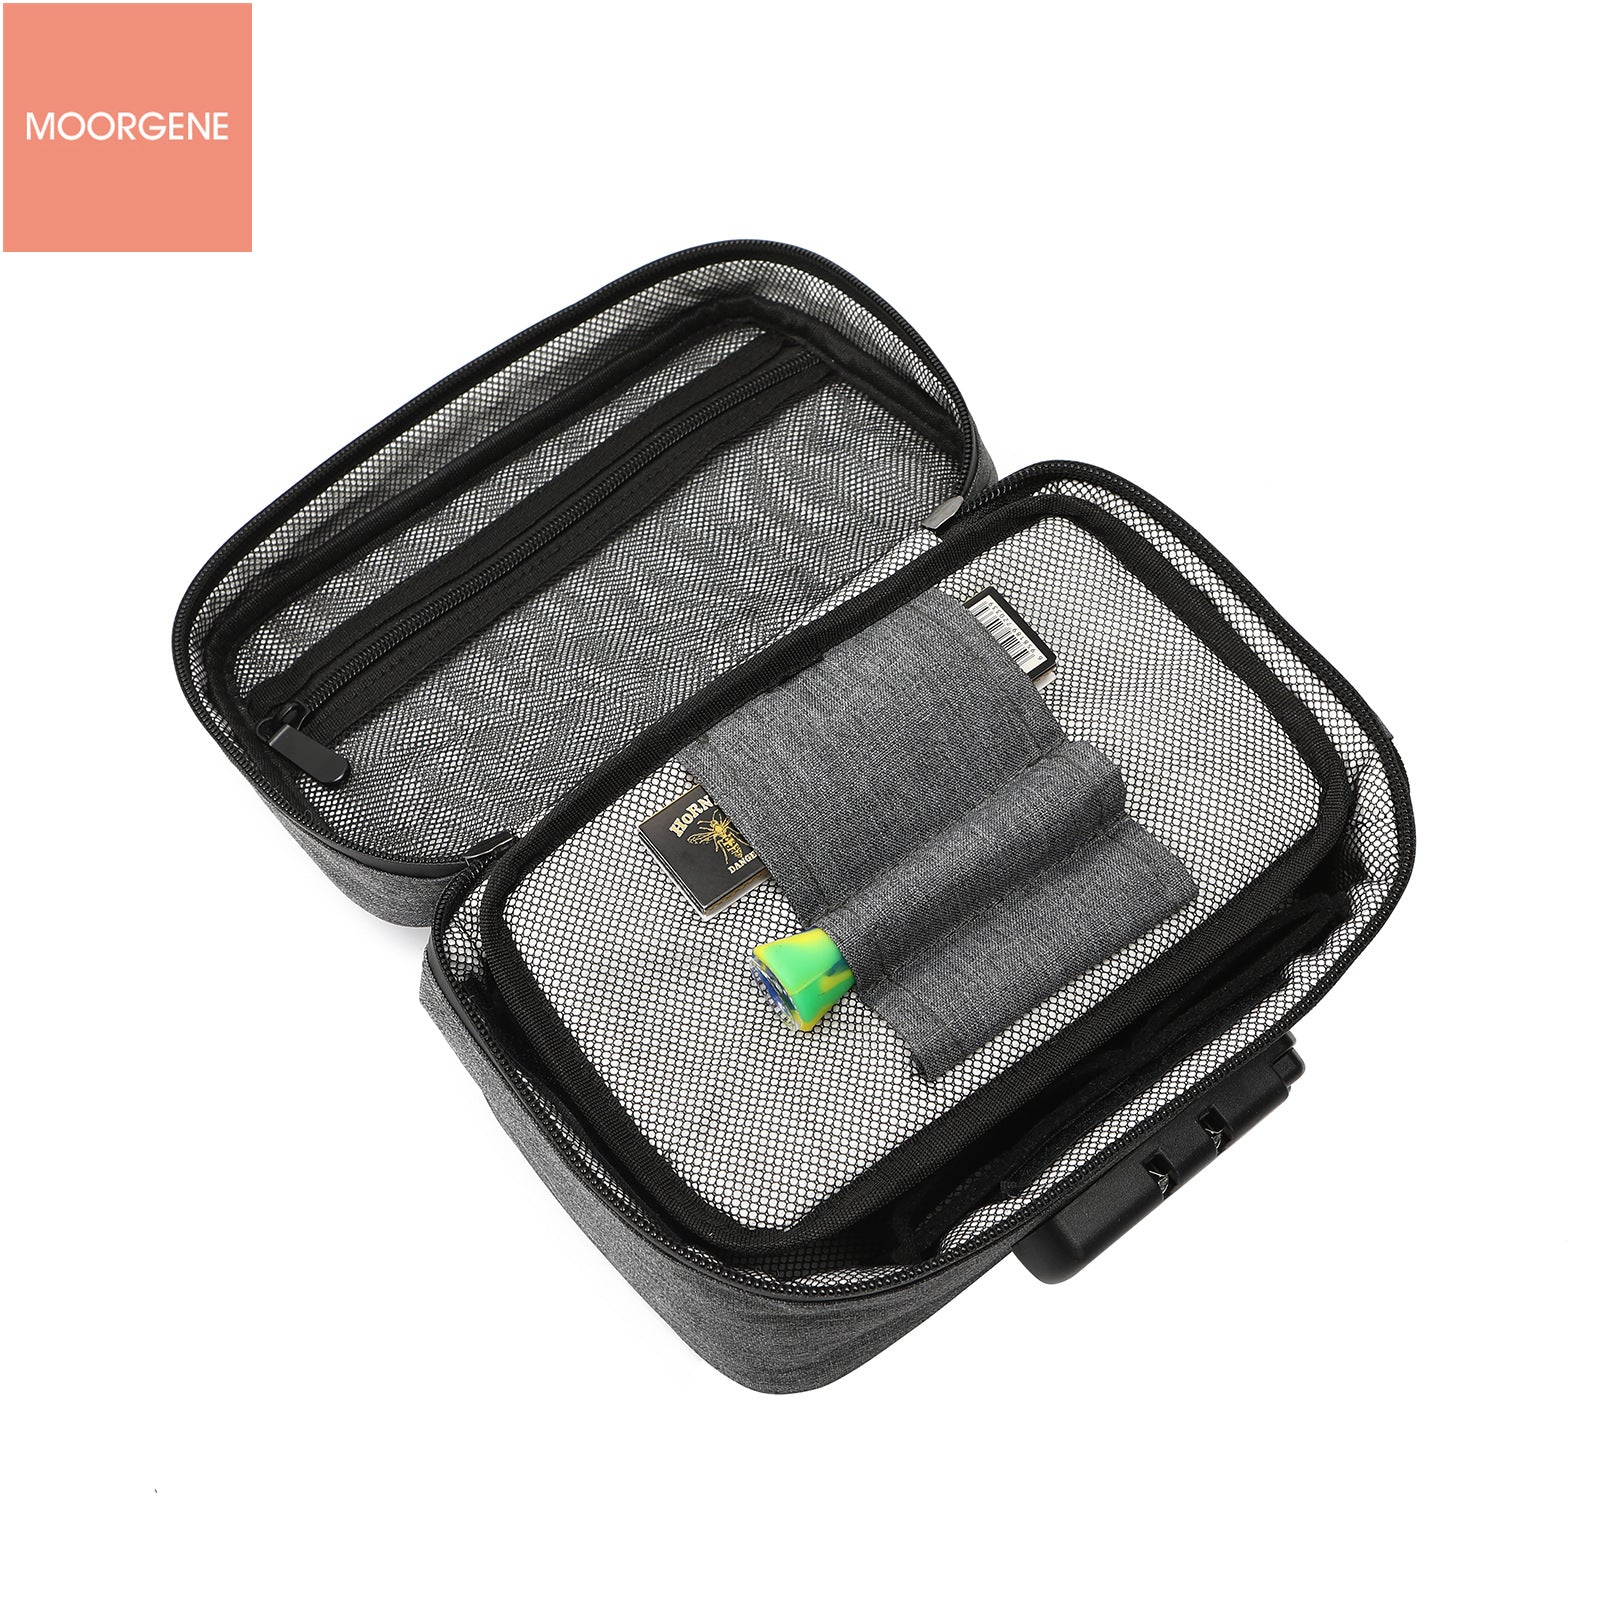 Smell Proof Bag For Tobacco Travel multifunctional Lockable Storage Case